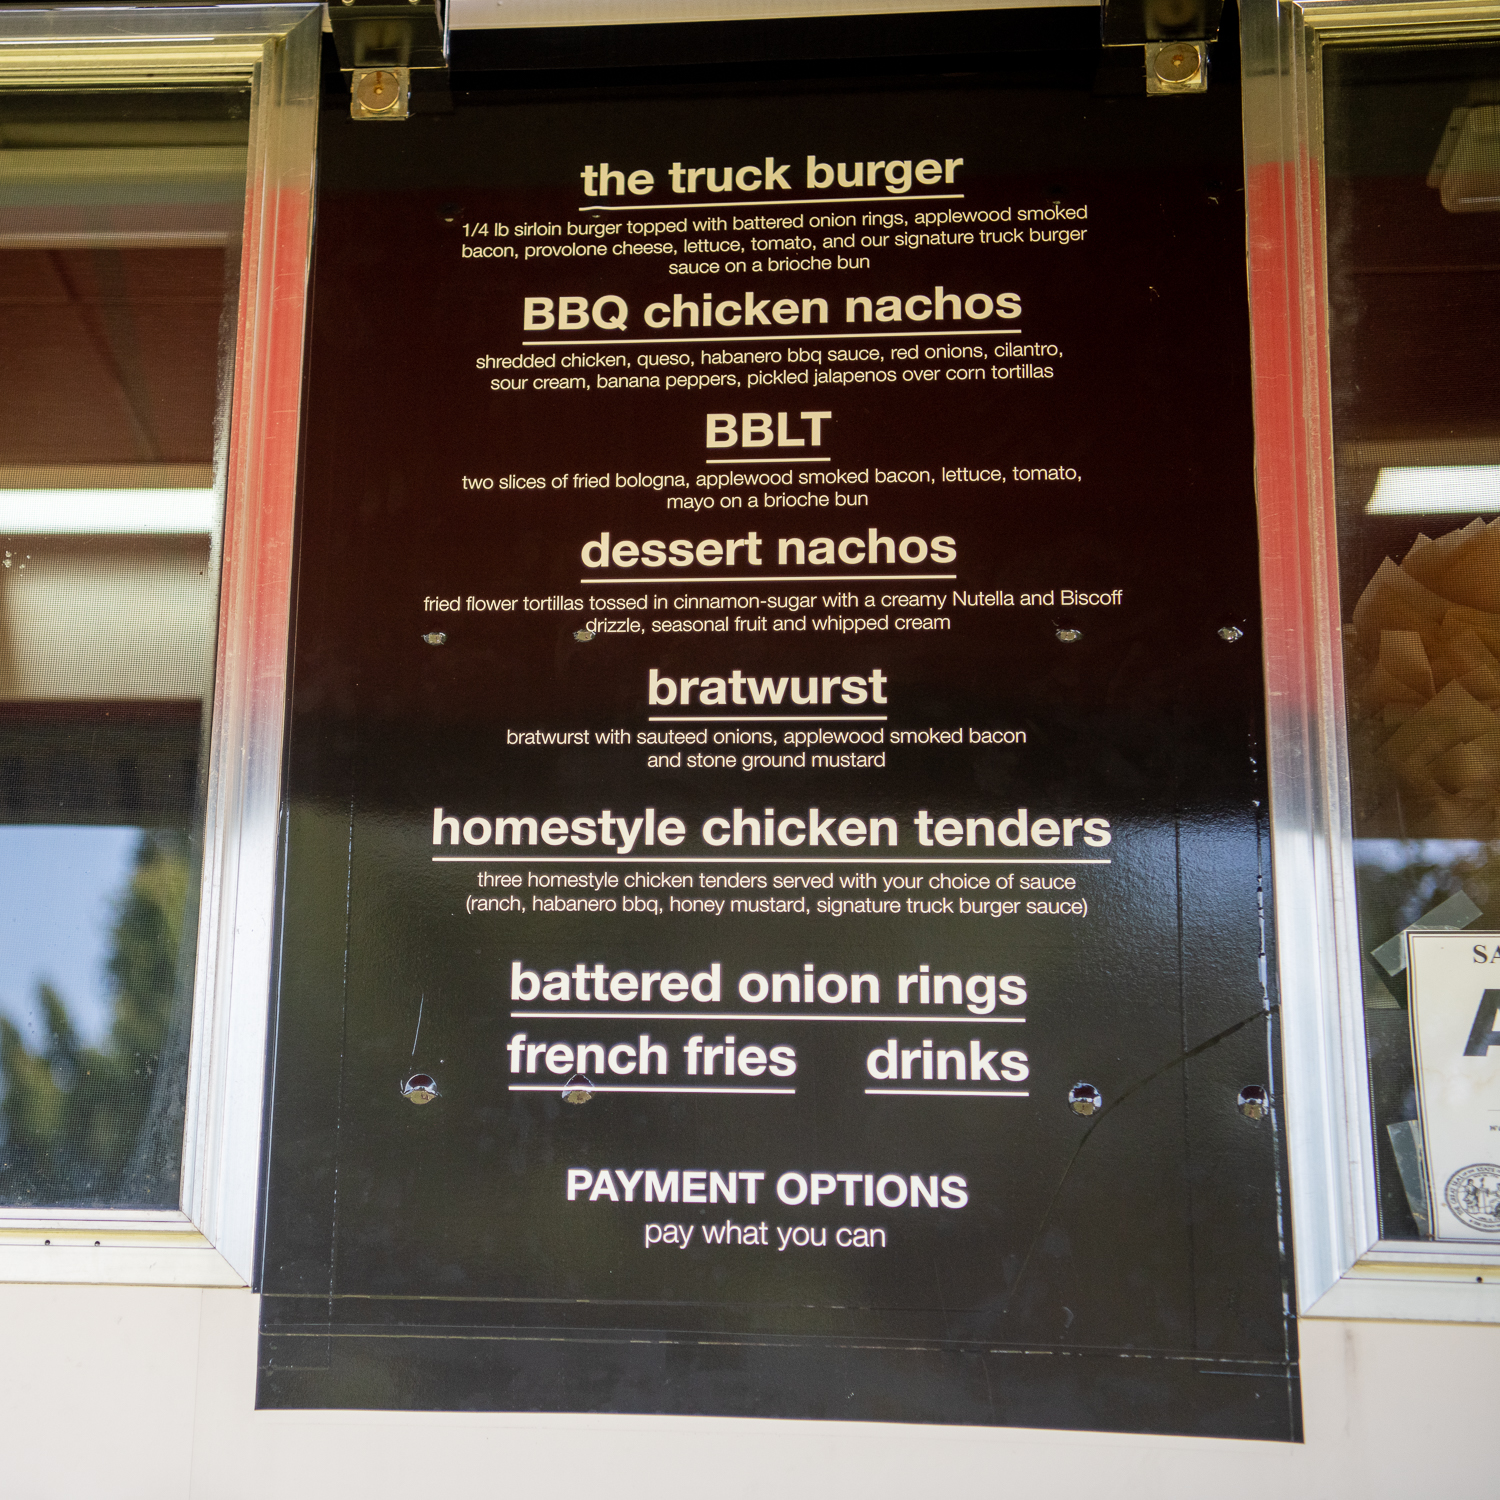 The Hope Truck Food Co. menu at the food truck lists items like the Truck Burger and BBQ Chicken Nachos.